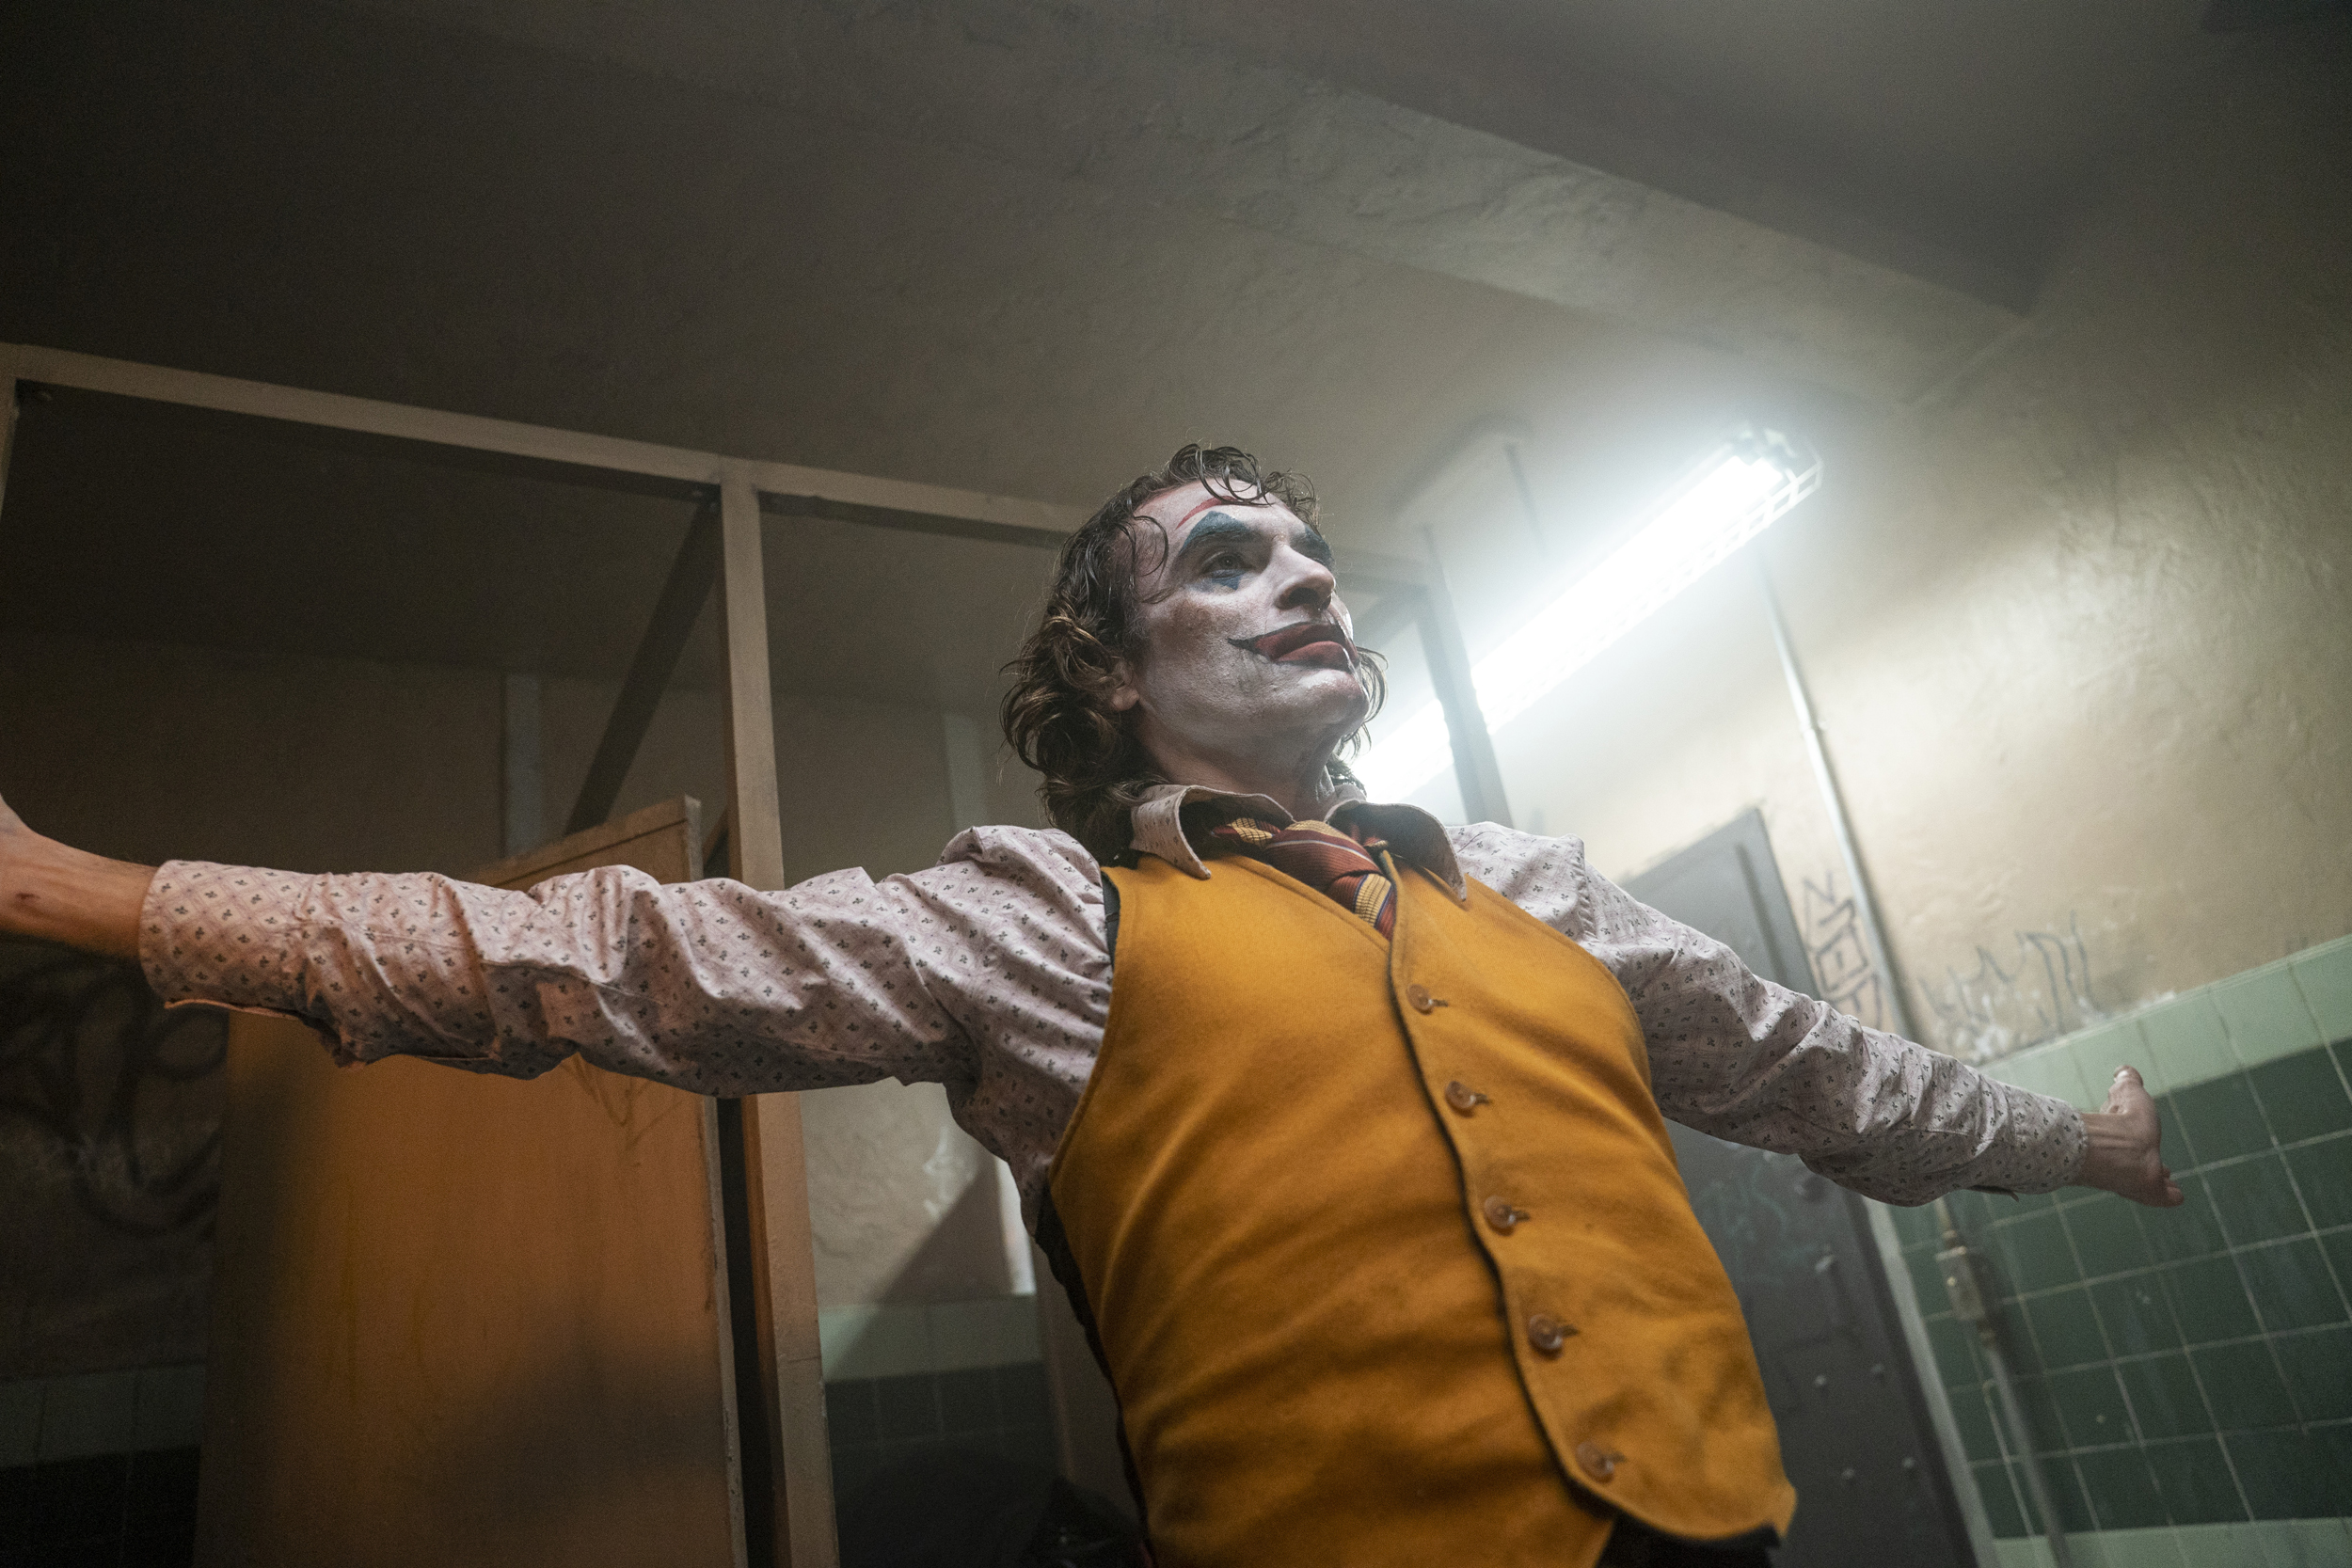 Joker stands in a bathroom, arms outstretched.